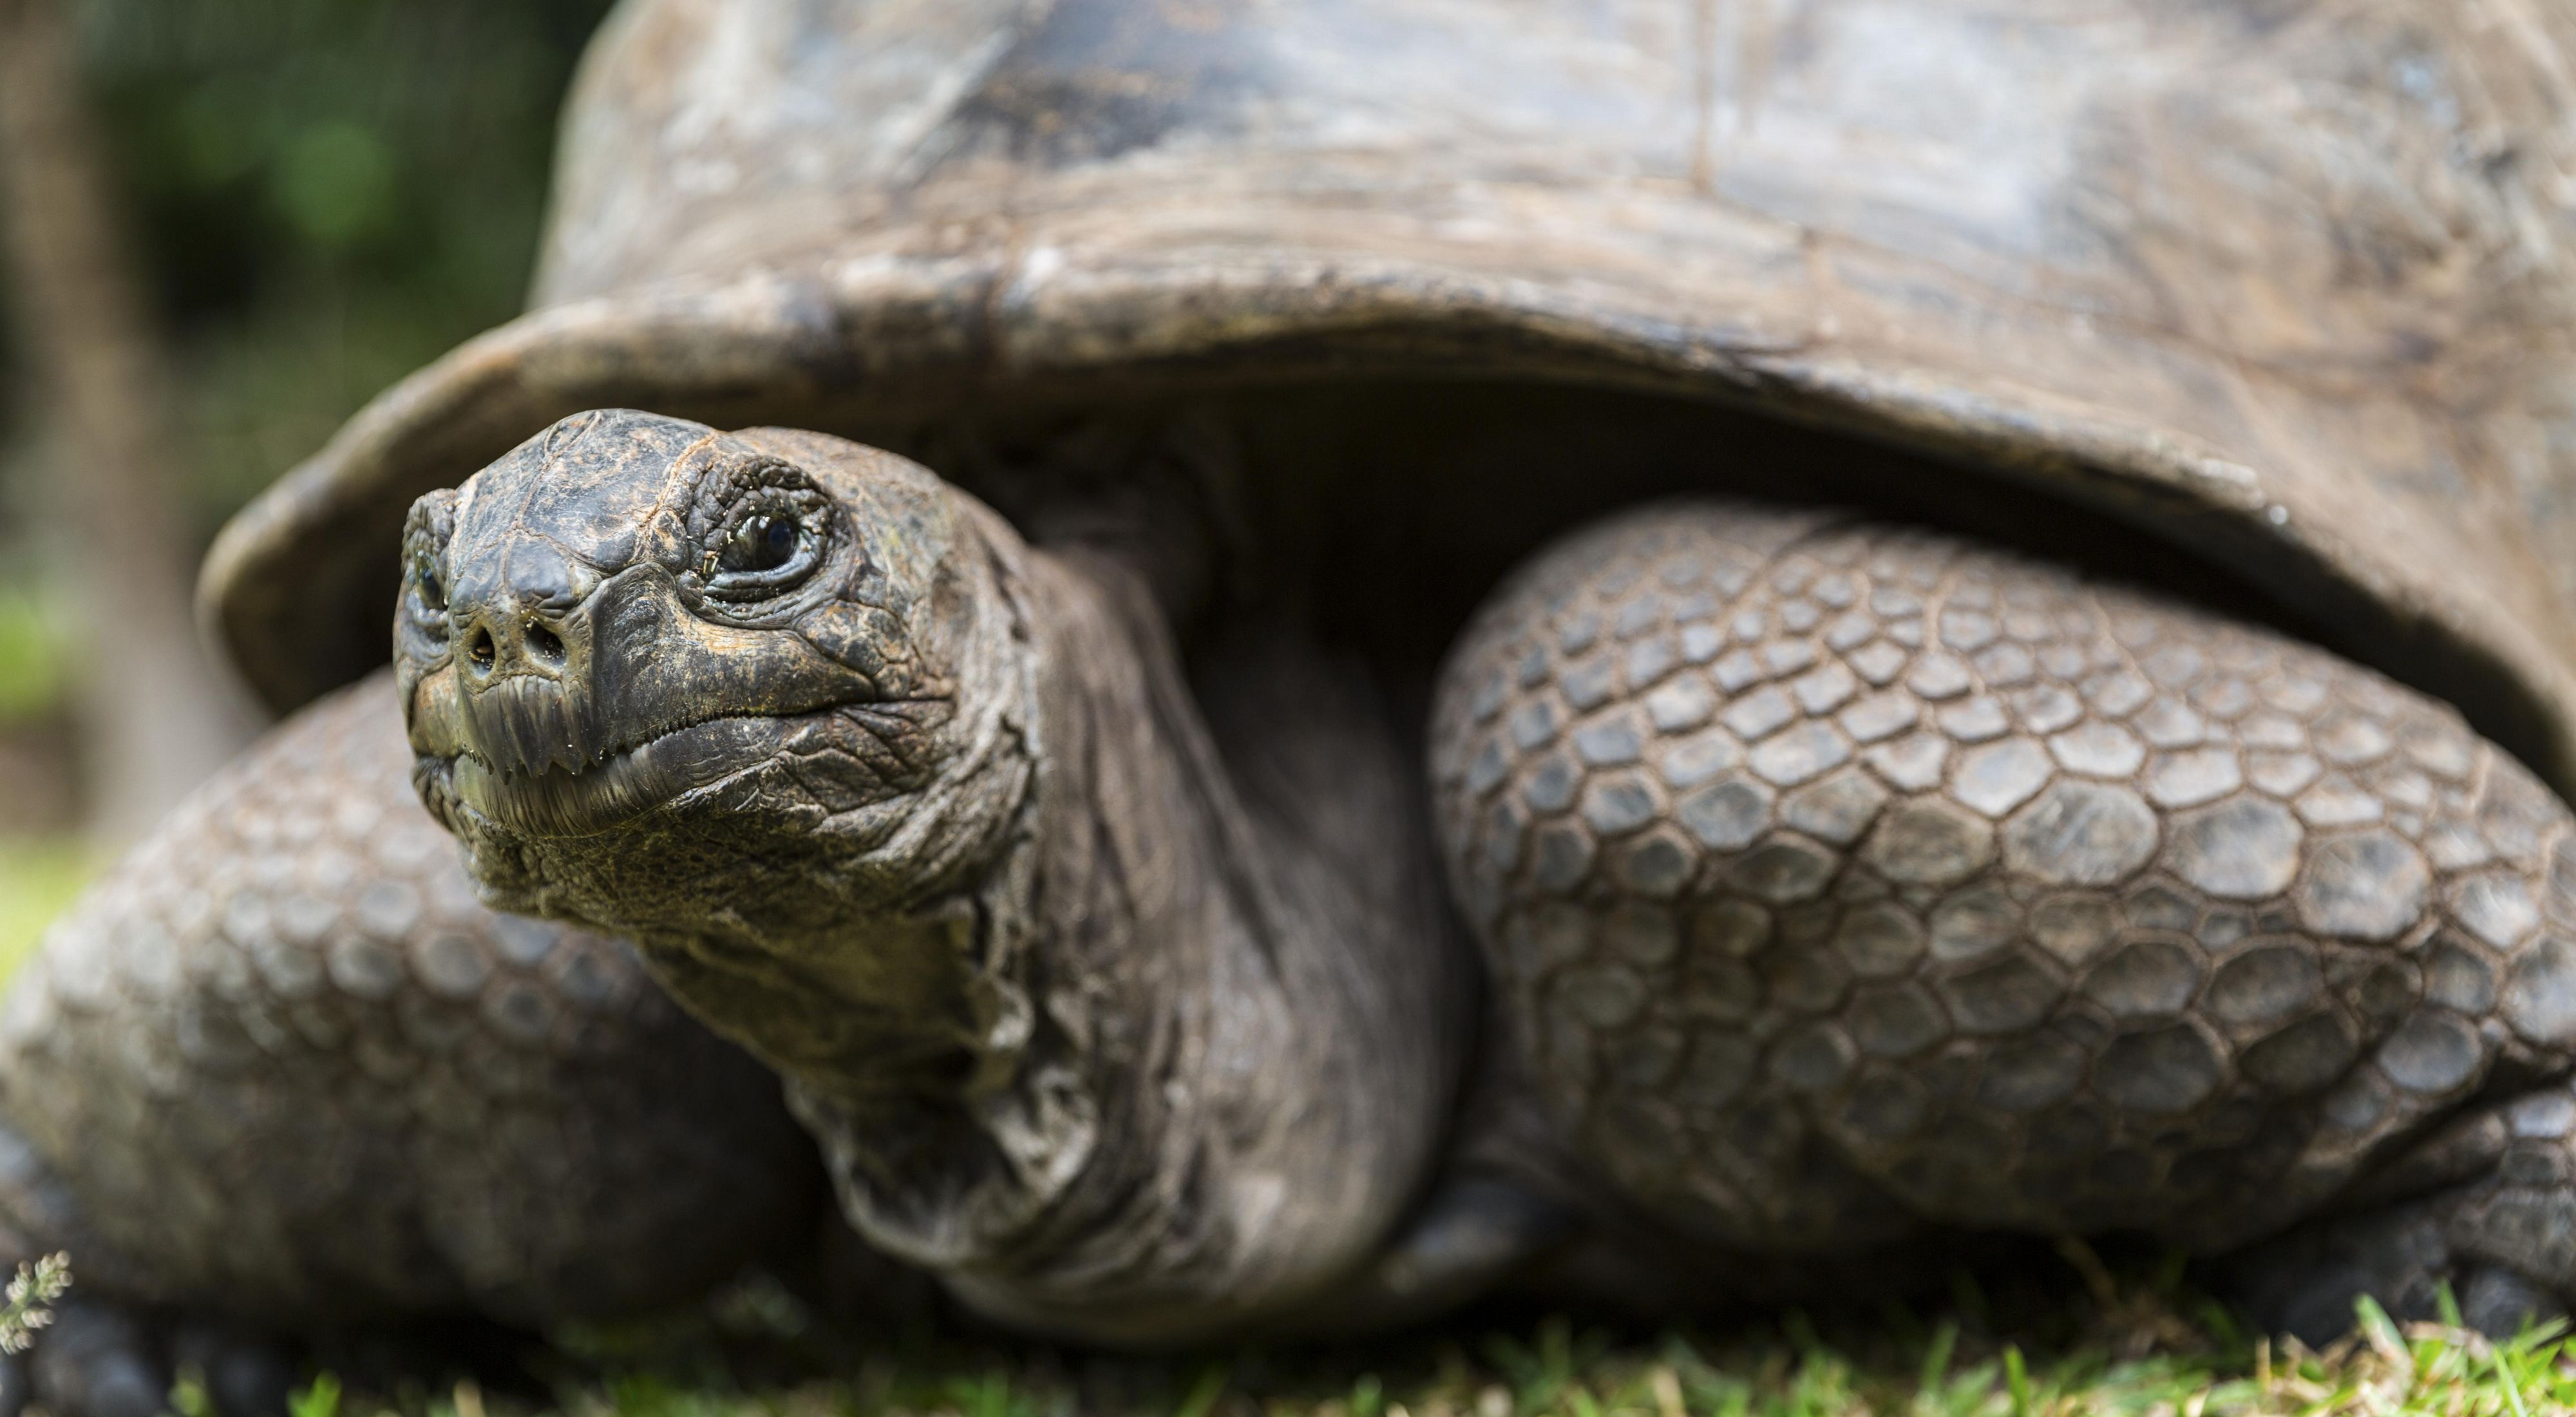 A Galapagos tortoise looks at the left side of the camera